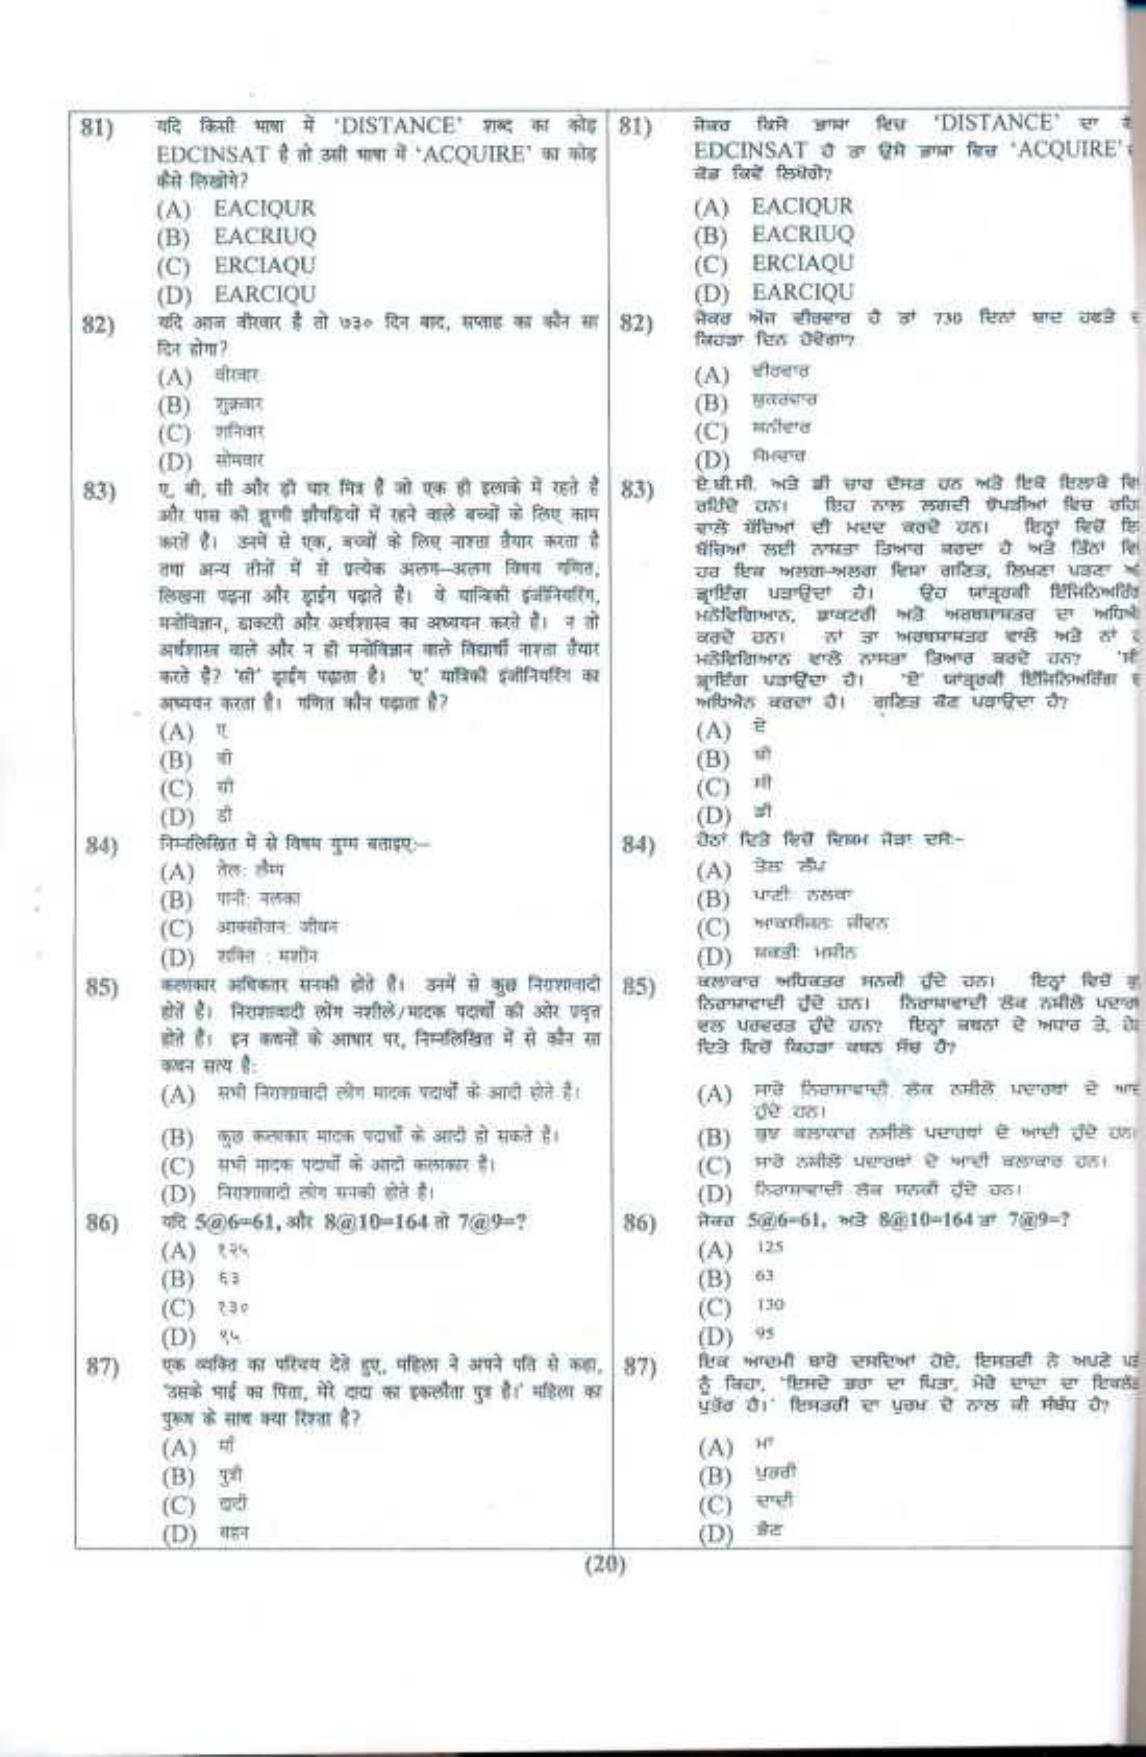 PU LLB 2019 Question Paper - Page 21